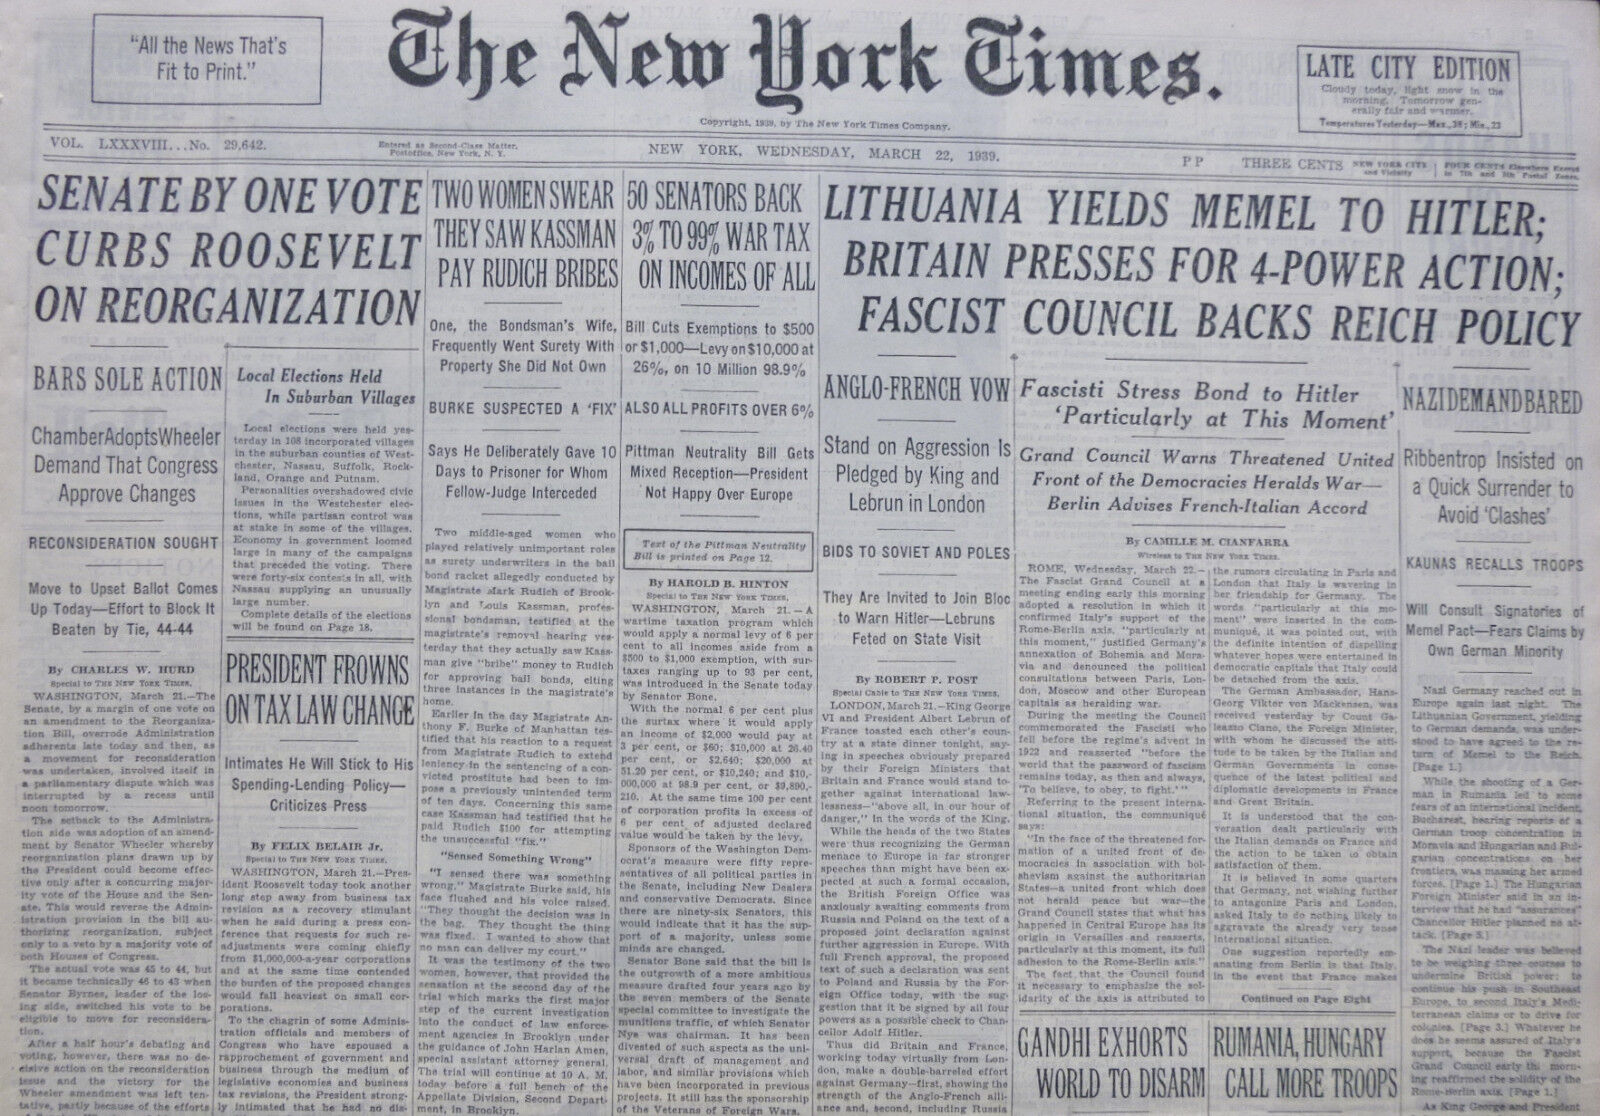 3-1939 WWII March 22 LITHUANIA YIELDS MEMEL TO HITLER BRITAIN PRESSES FOR ACTION